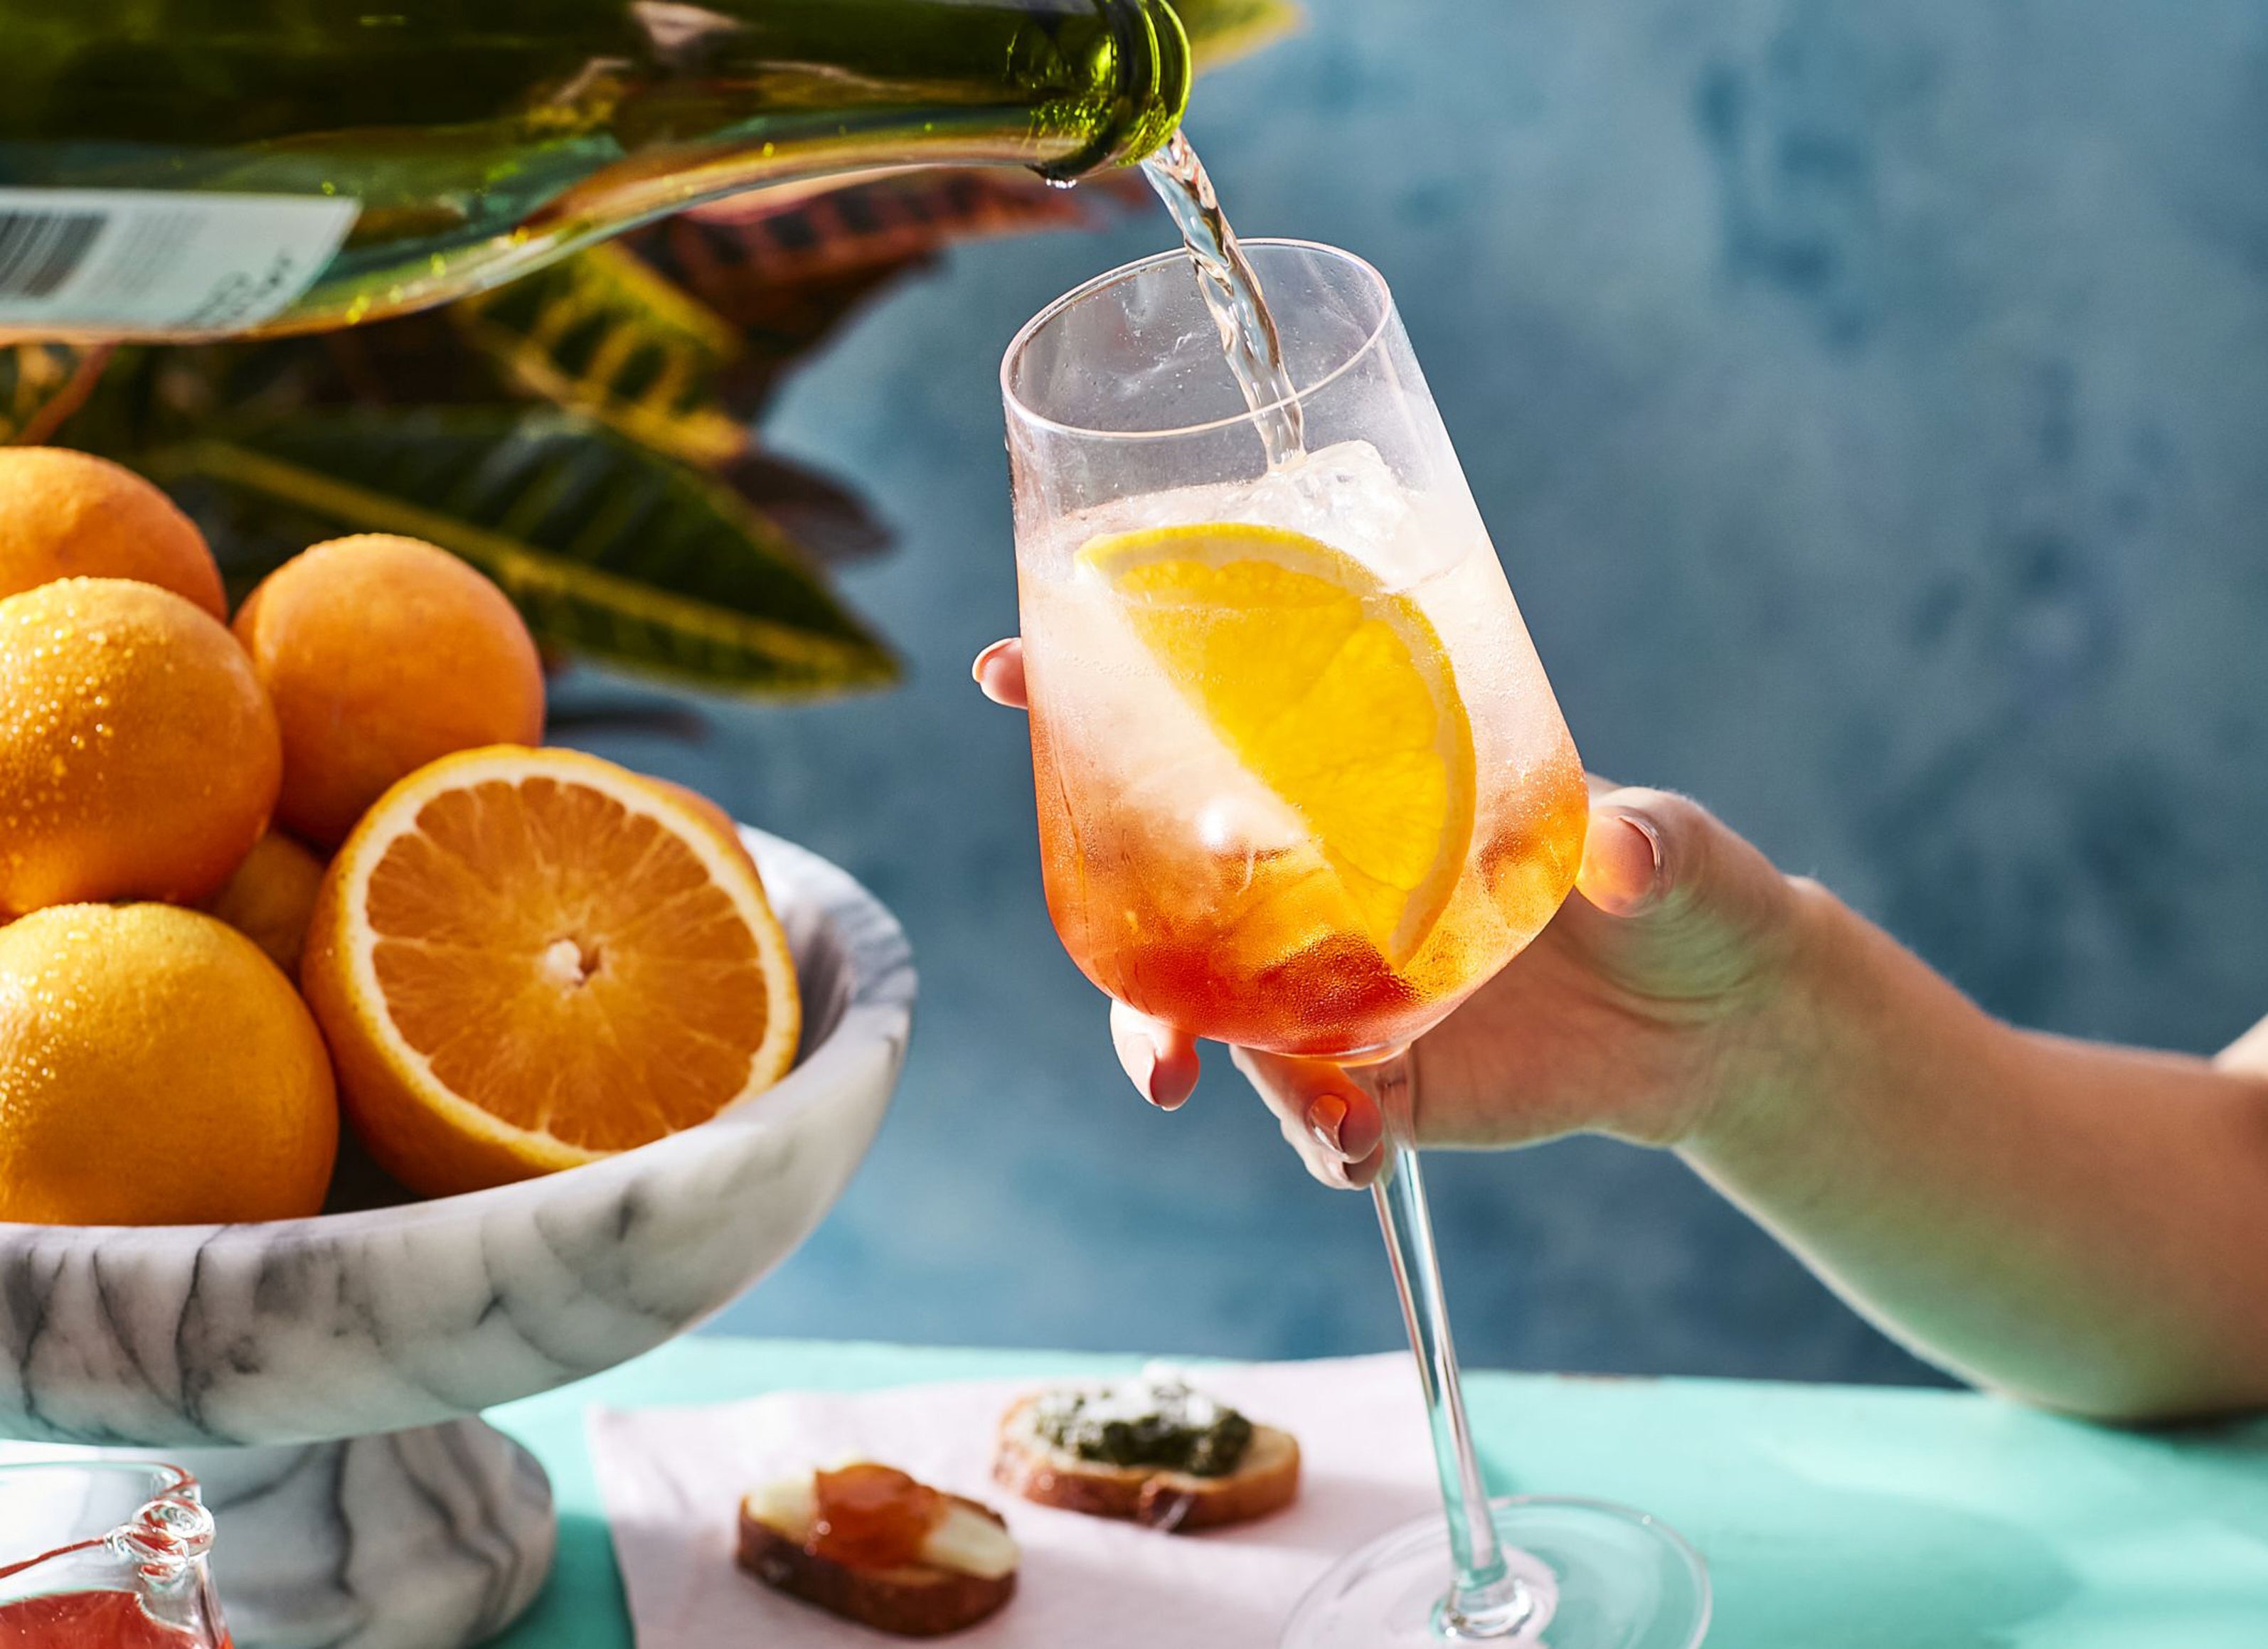 There’s something stylish about a spritz